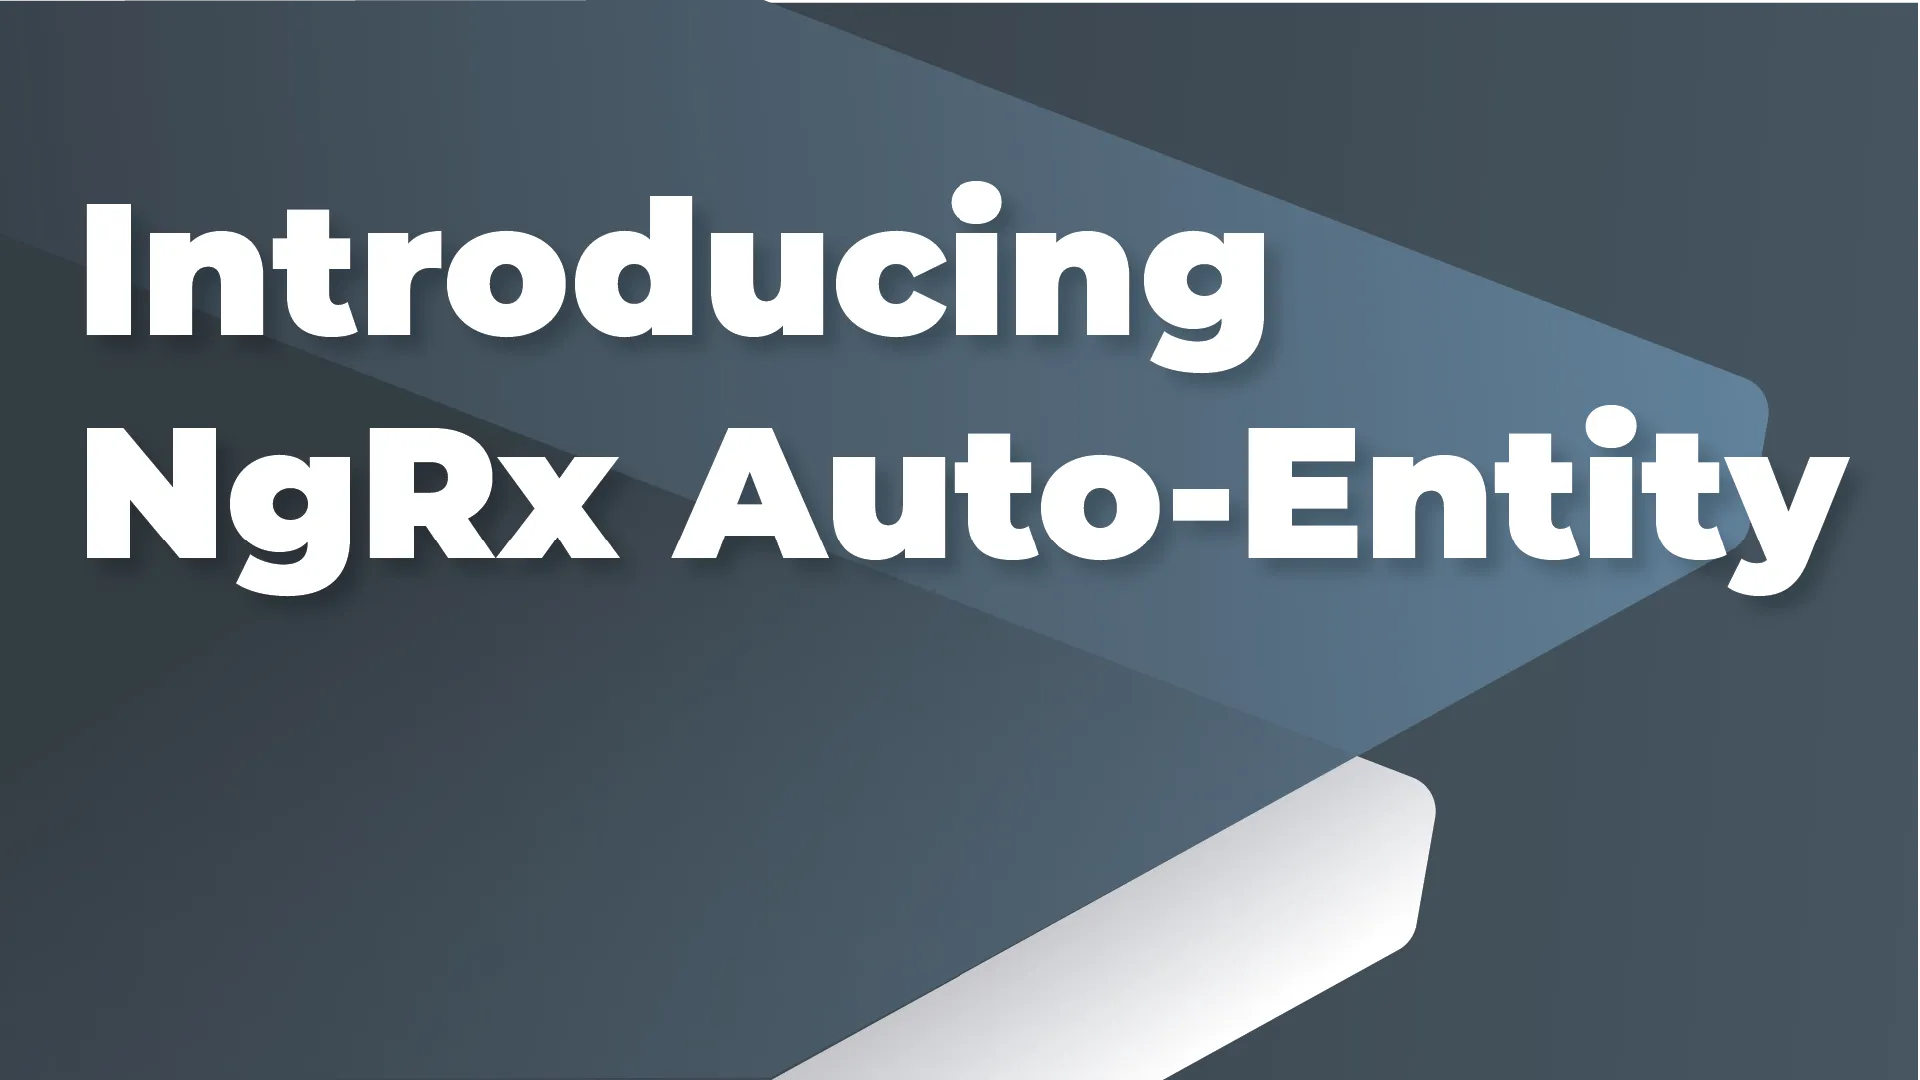 Introducing NgRx Auto-Entity